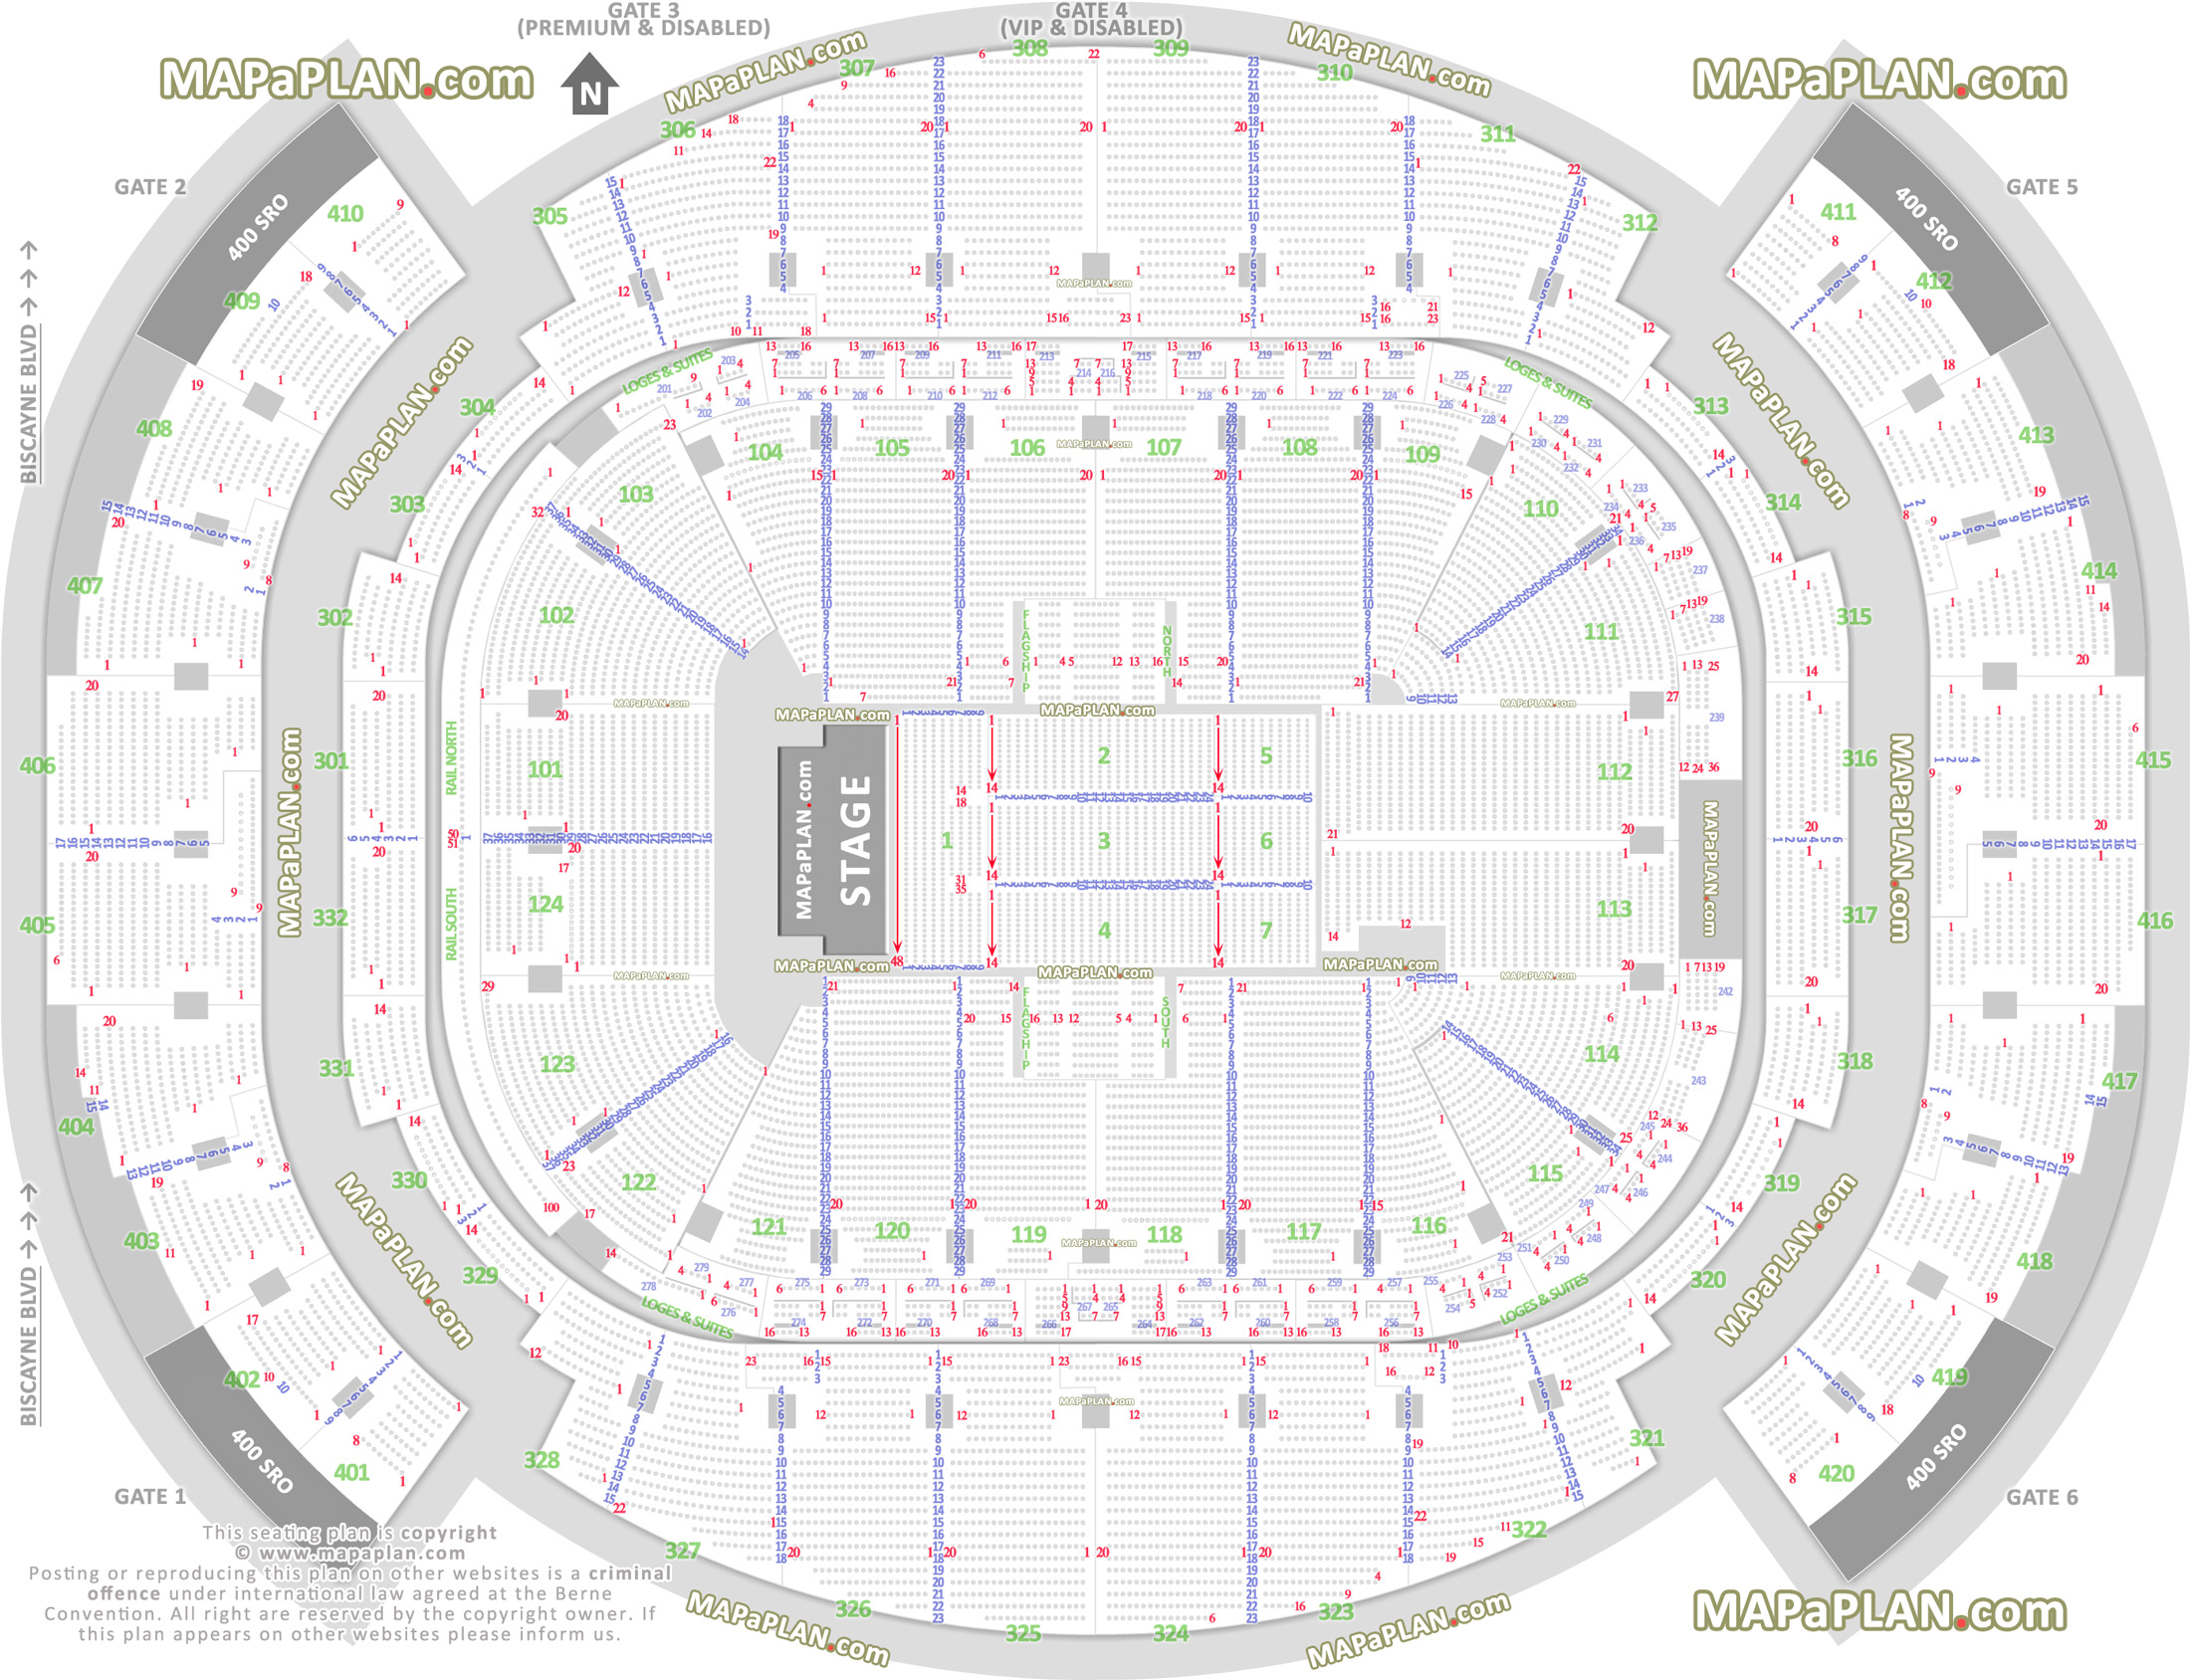 Miami Heat Arena Seating Chart With Seat Numbers